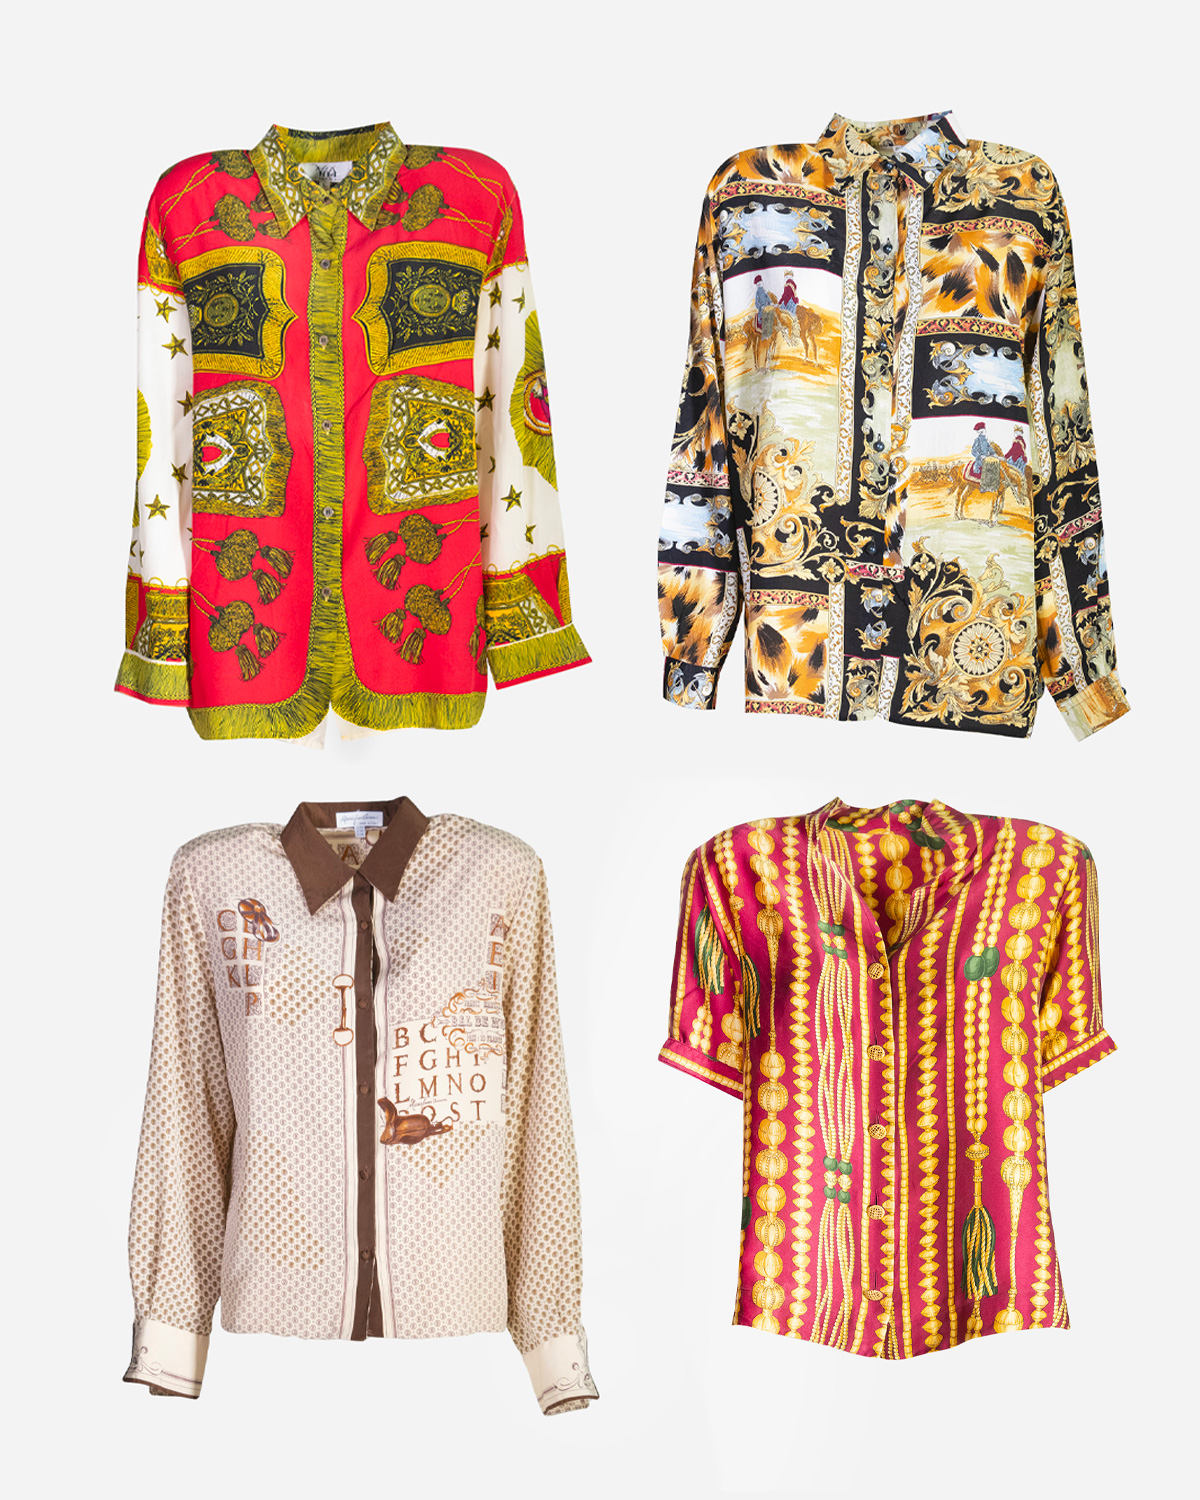 Vintage Baroque-style women's shirts: 4 pieces